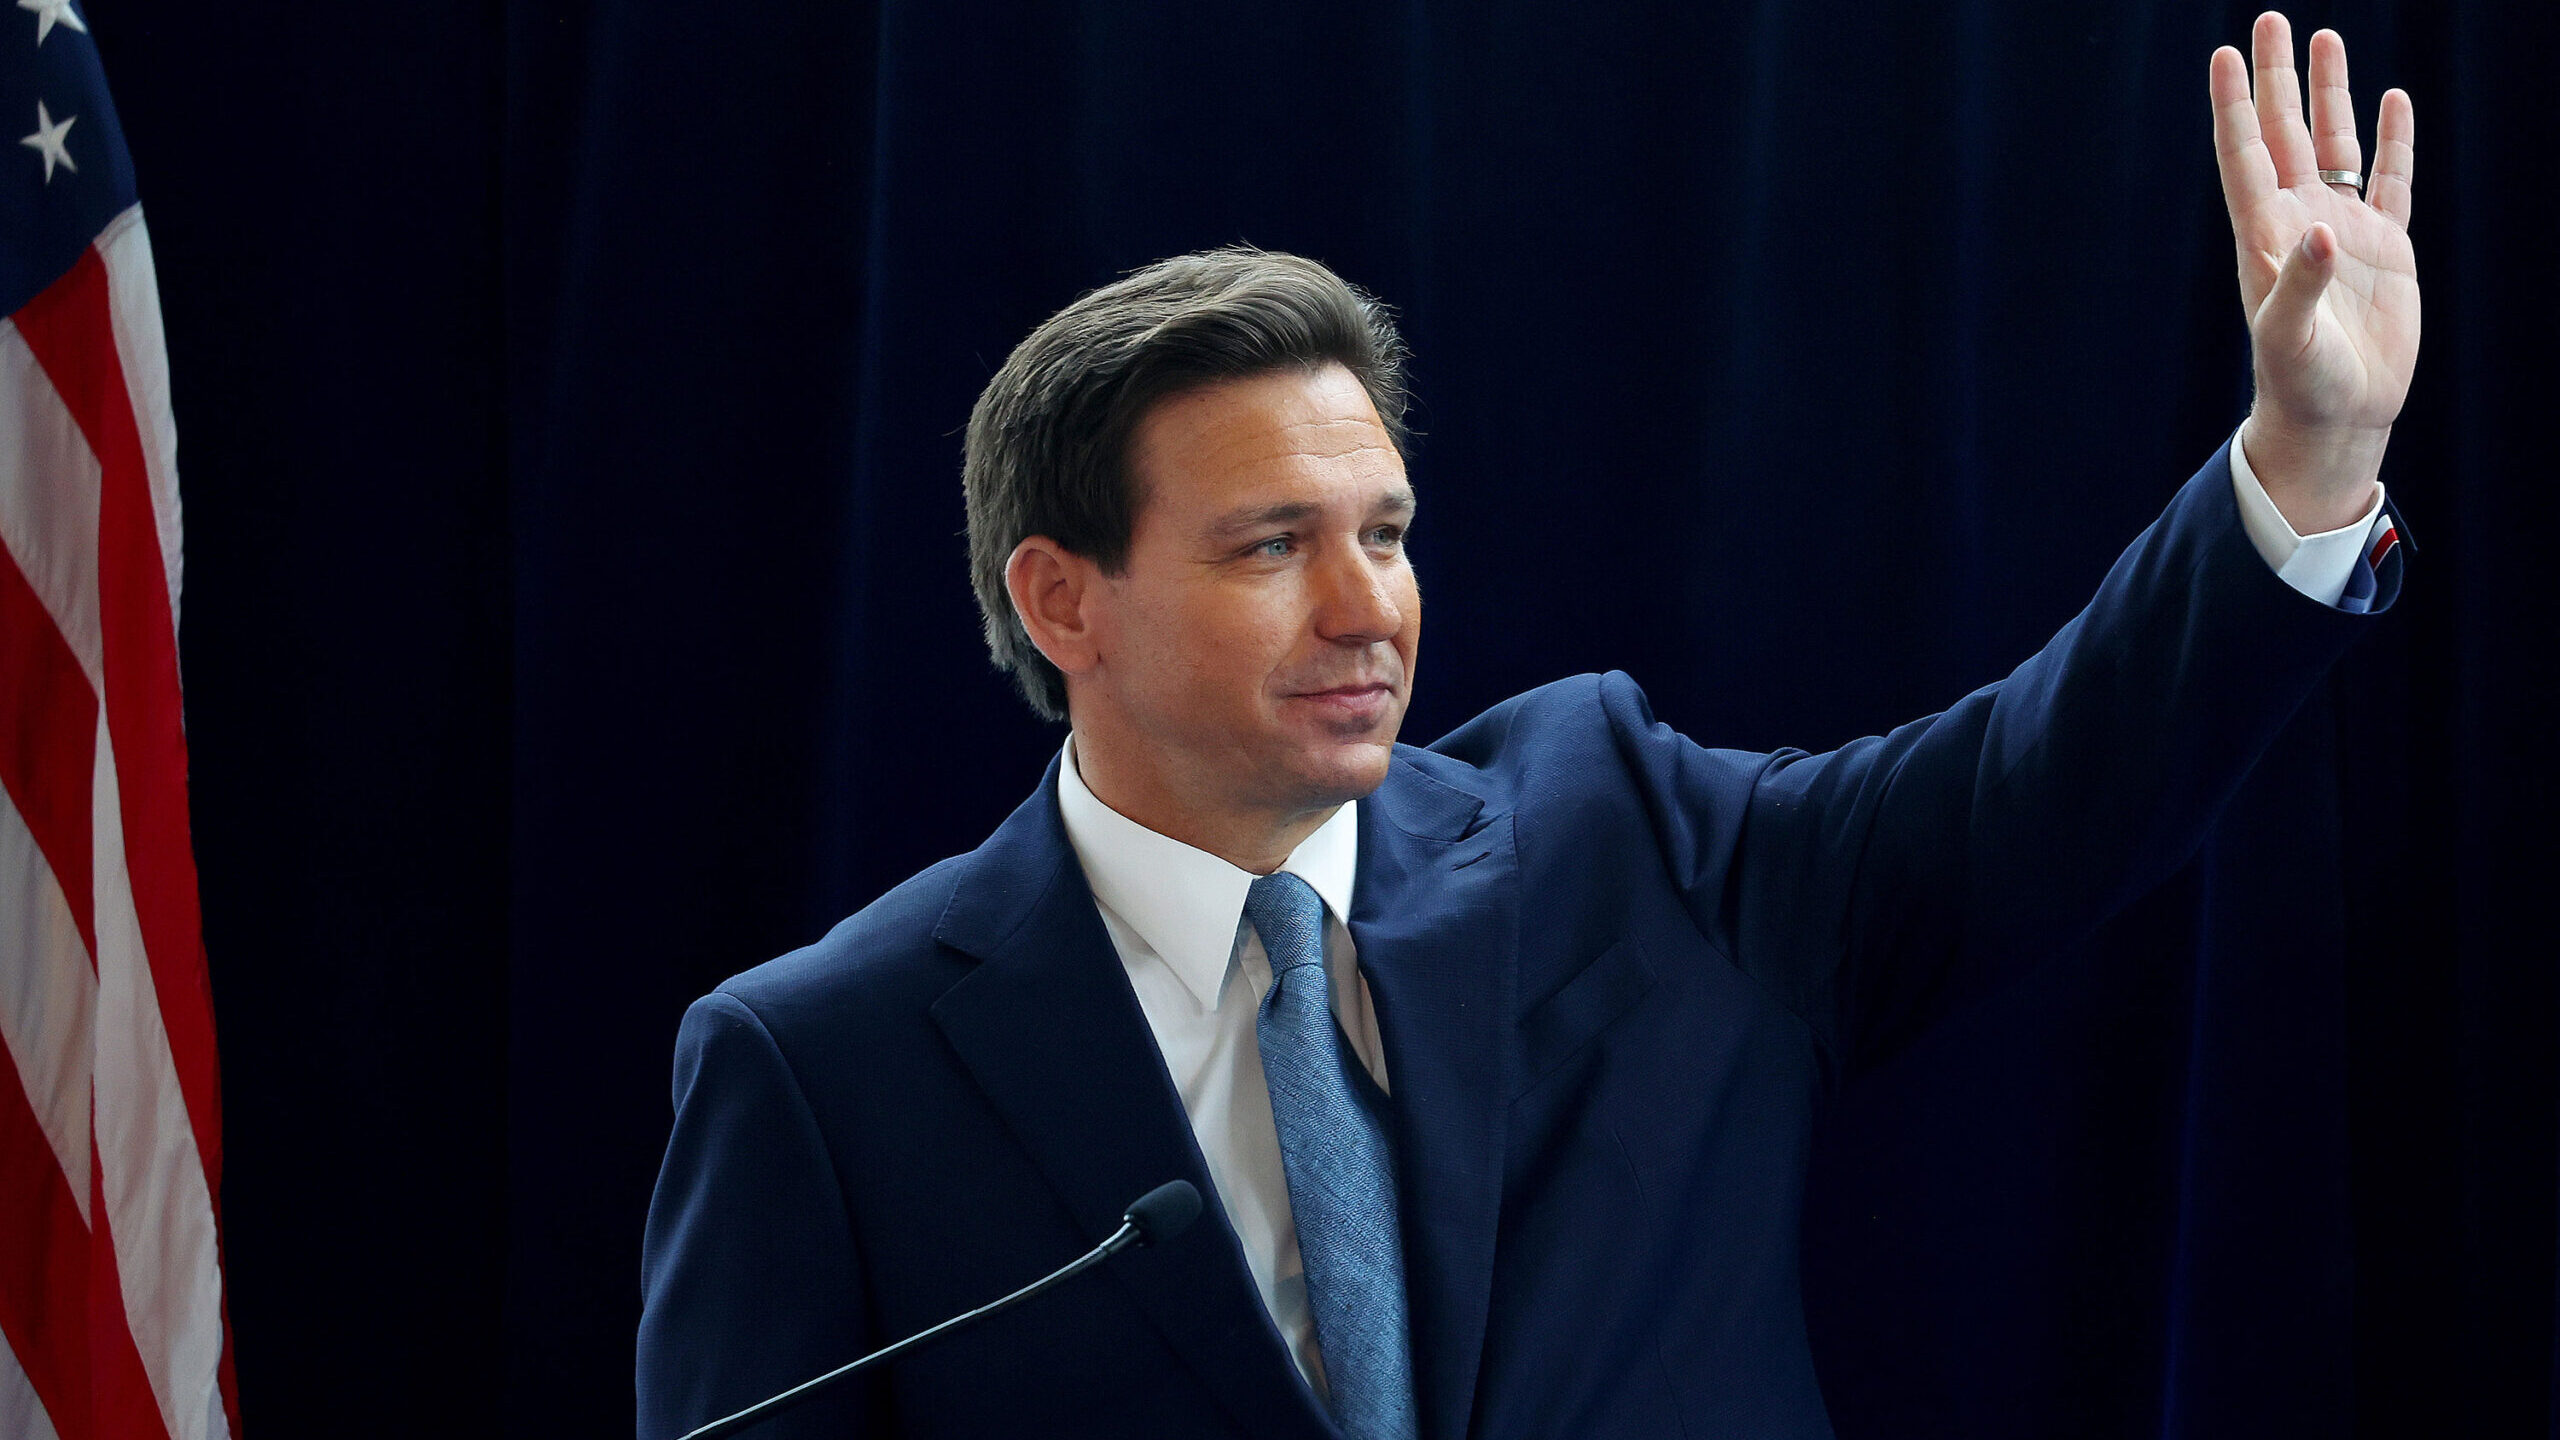 Florida Gov. Ron DeSantis waves to the crowd at the Reagan Library in Simi Valley, California, on M...